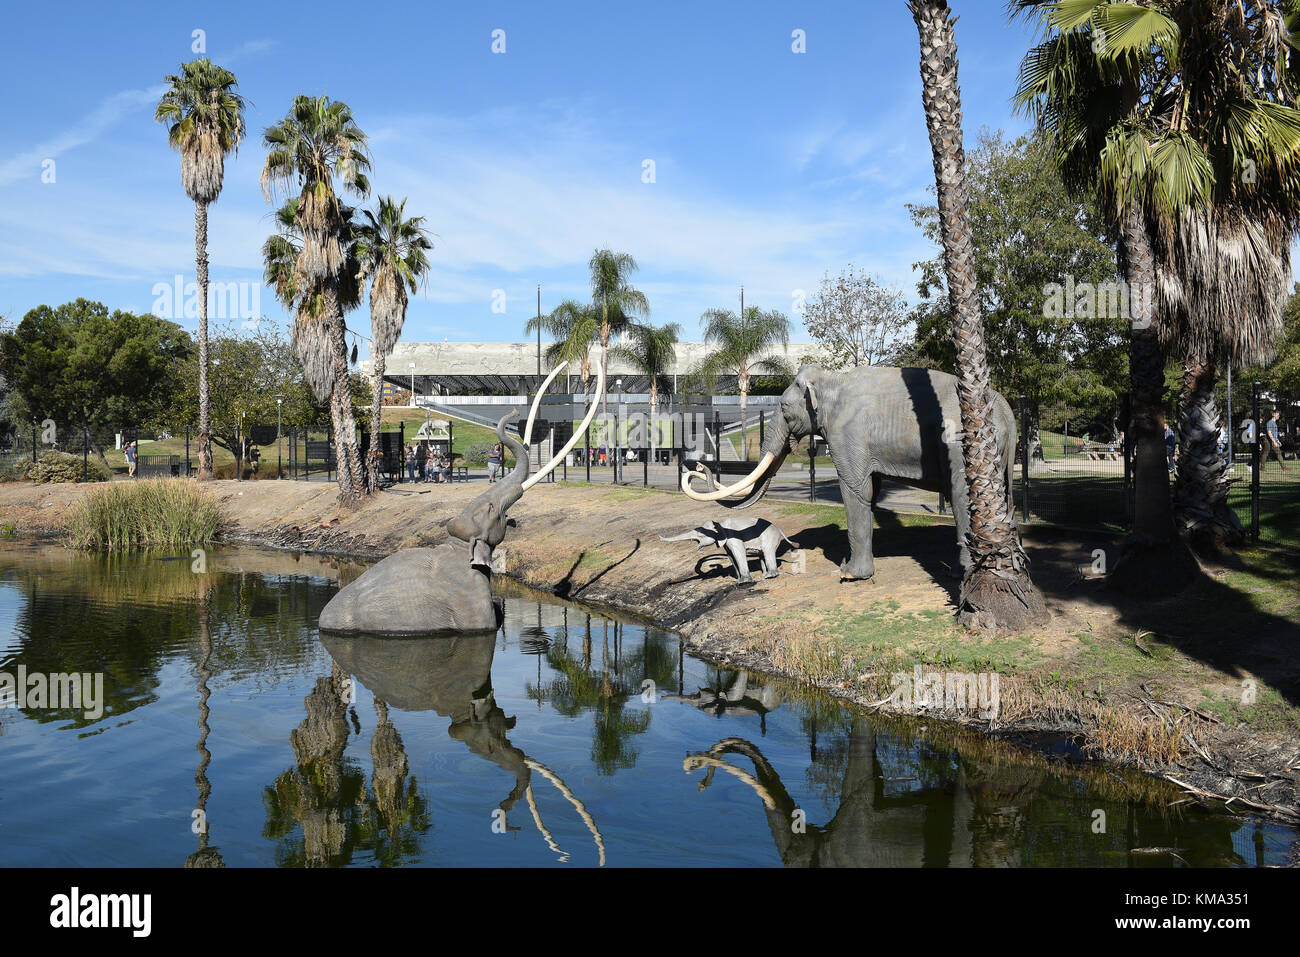 LOS ANGELES - NOVEMBER 24, 2017: Lake Pit at the La Brea Tar Pits.  Pleistocene mammoth statues depict how animals became trapped in the tar. Stock Photo